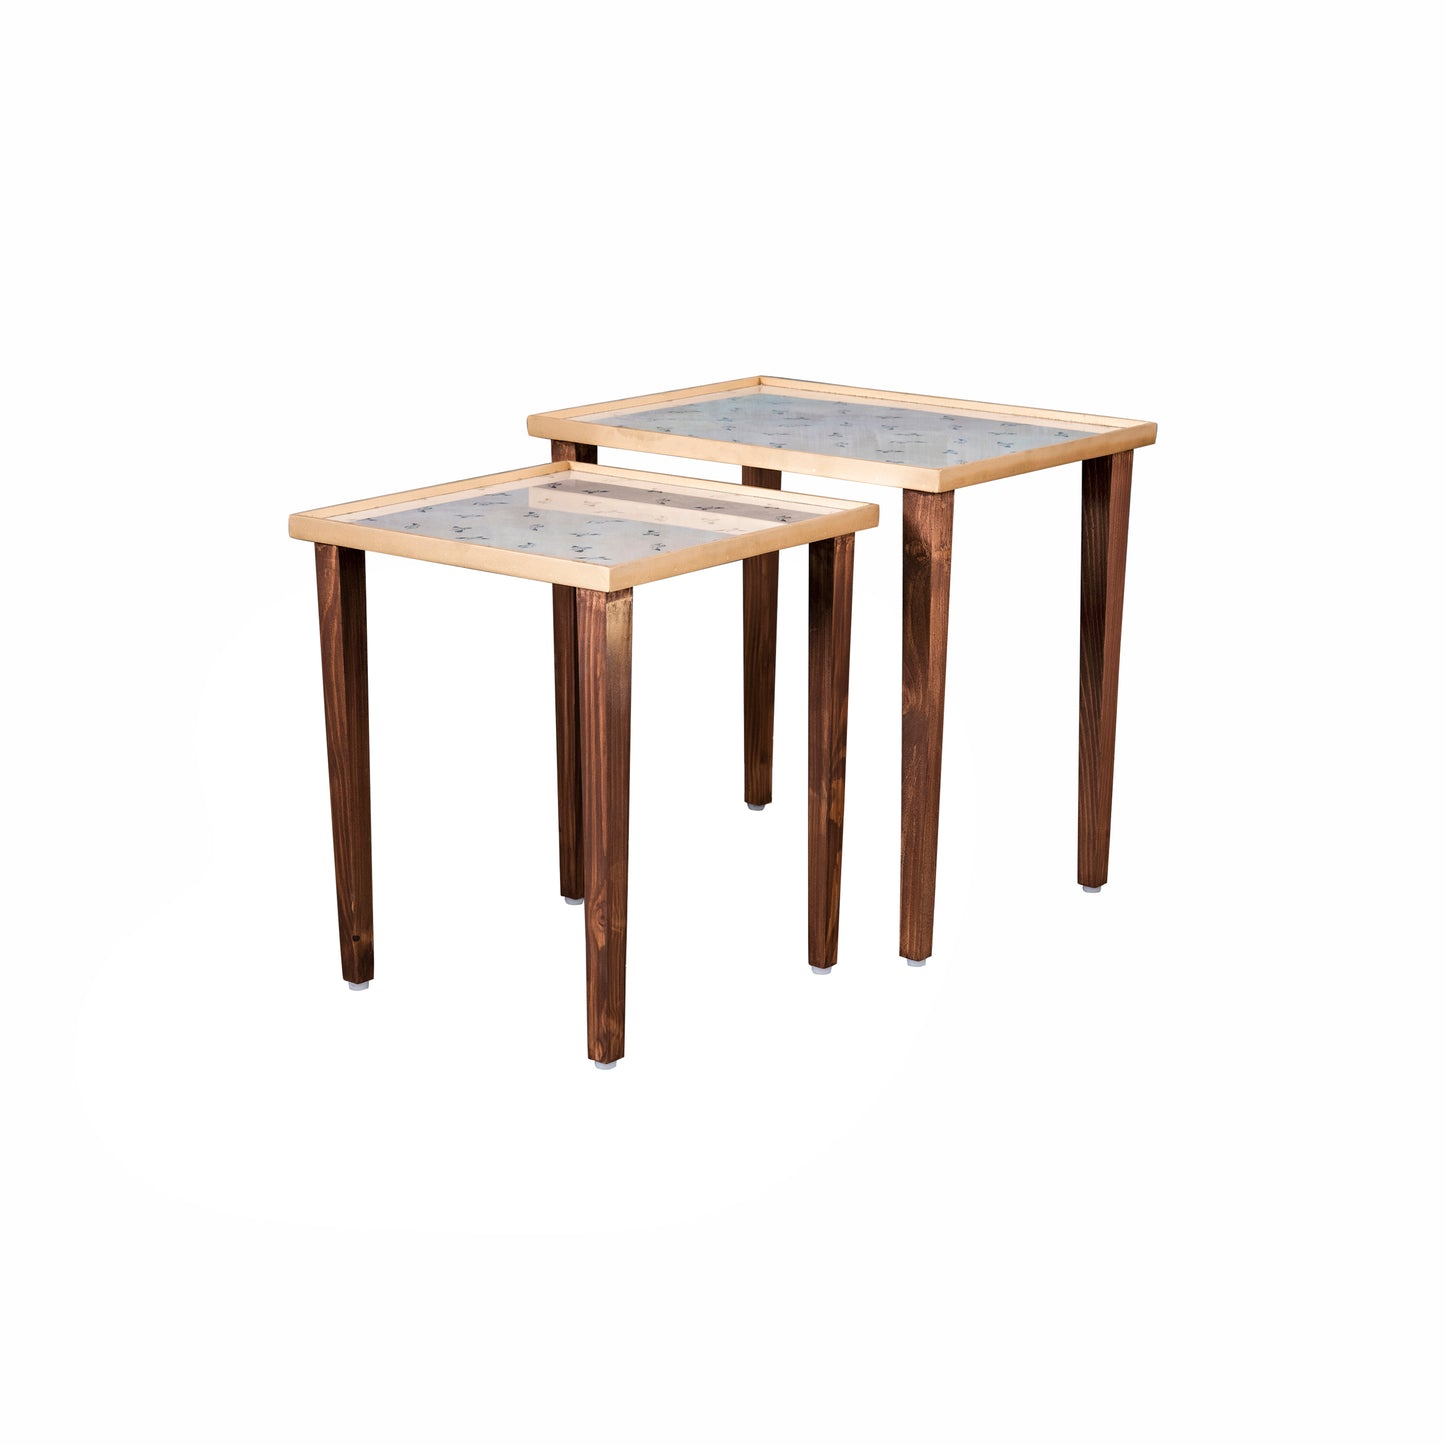 A Tiny Mistake Seagull Wooden Rectangle Nesting Tables (Set of 2), Living Room Decor